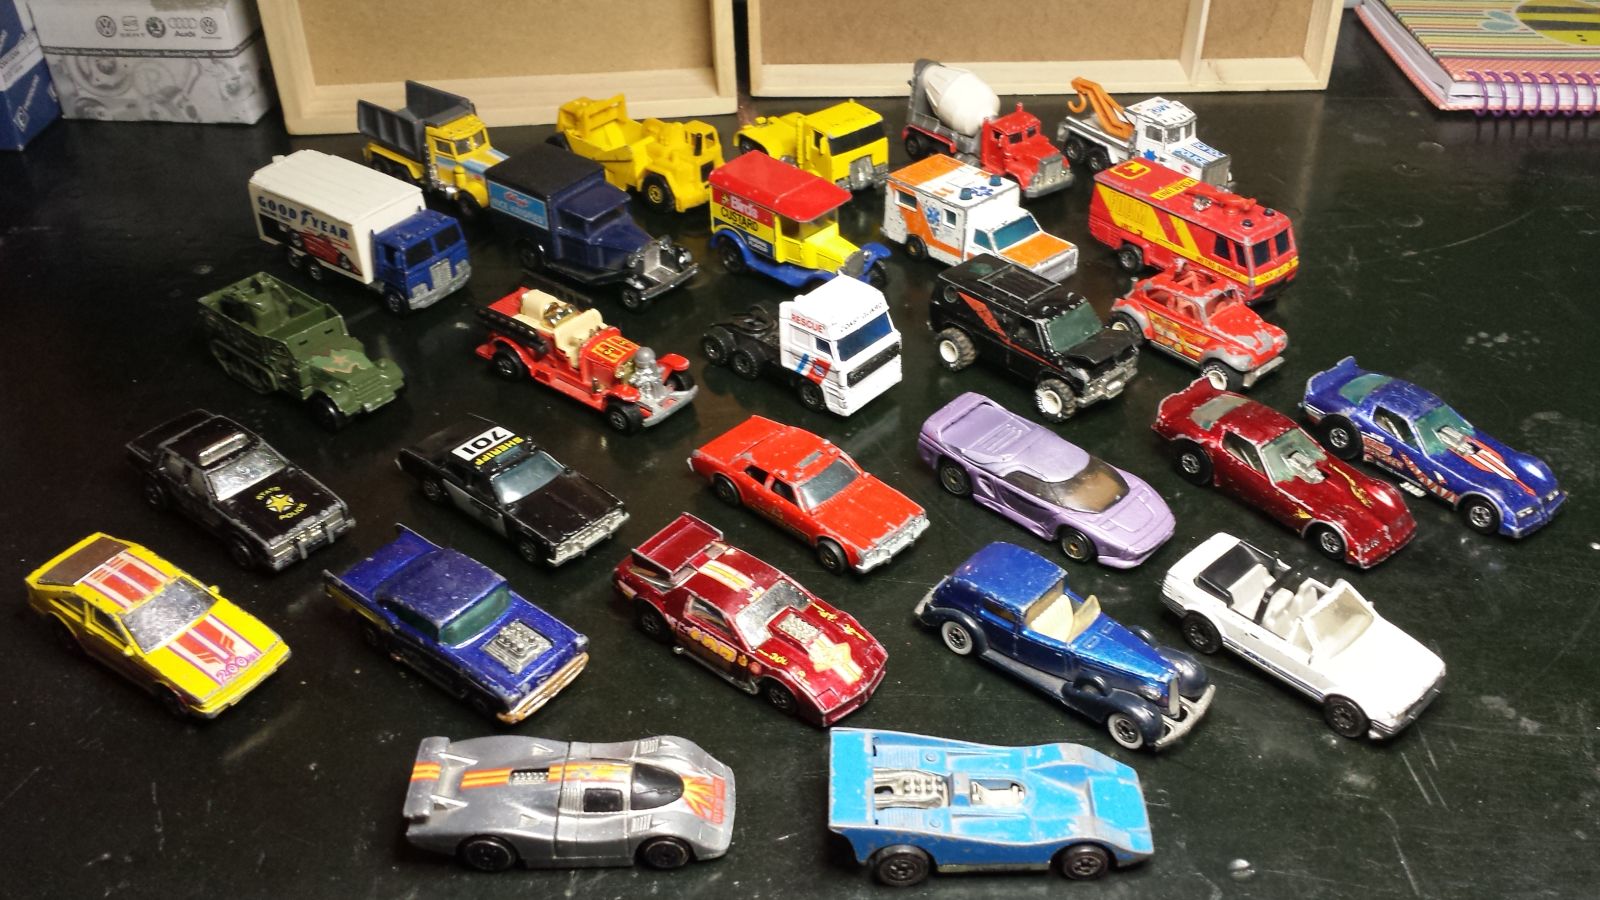 These are all I have left from my childhood, will take offers but don’t be surprised if I can’t part with them. Sold: Escort